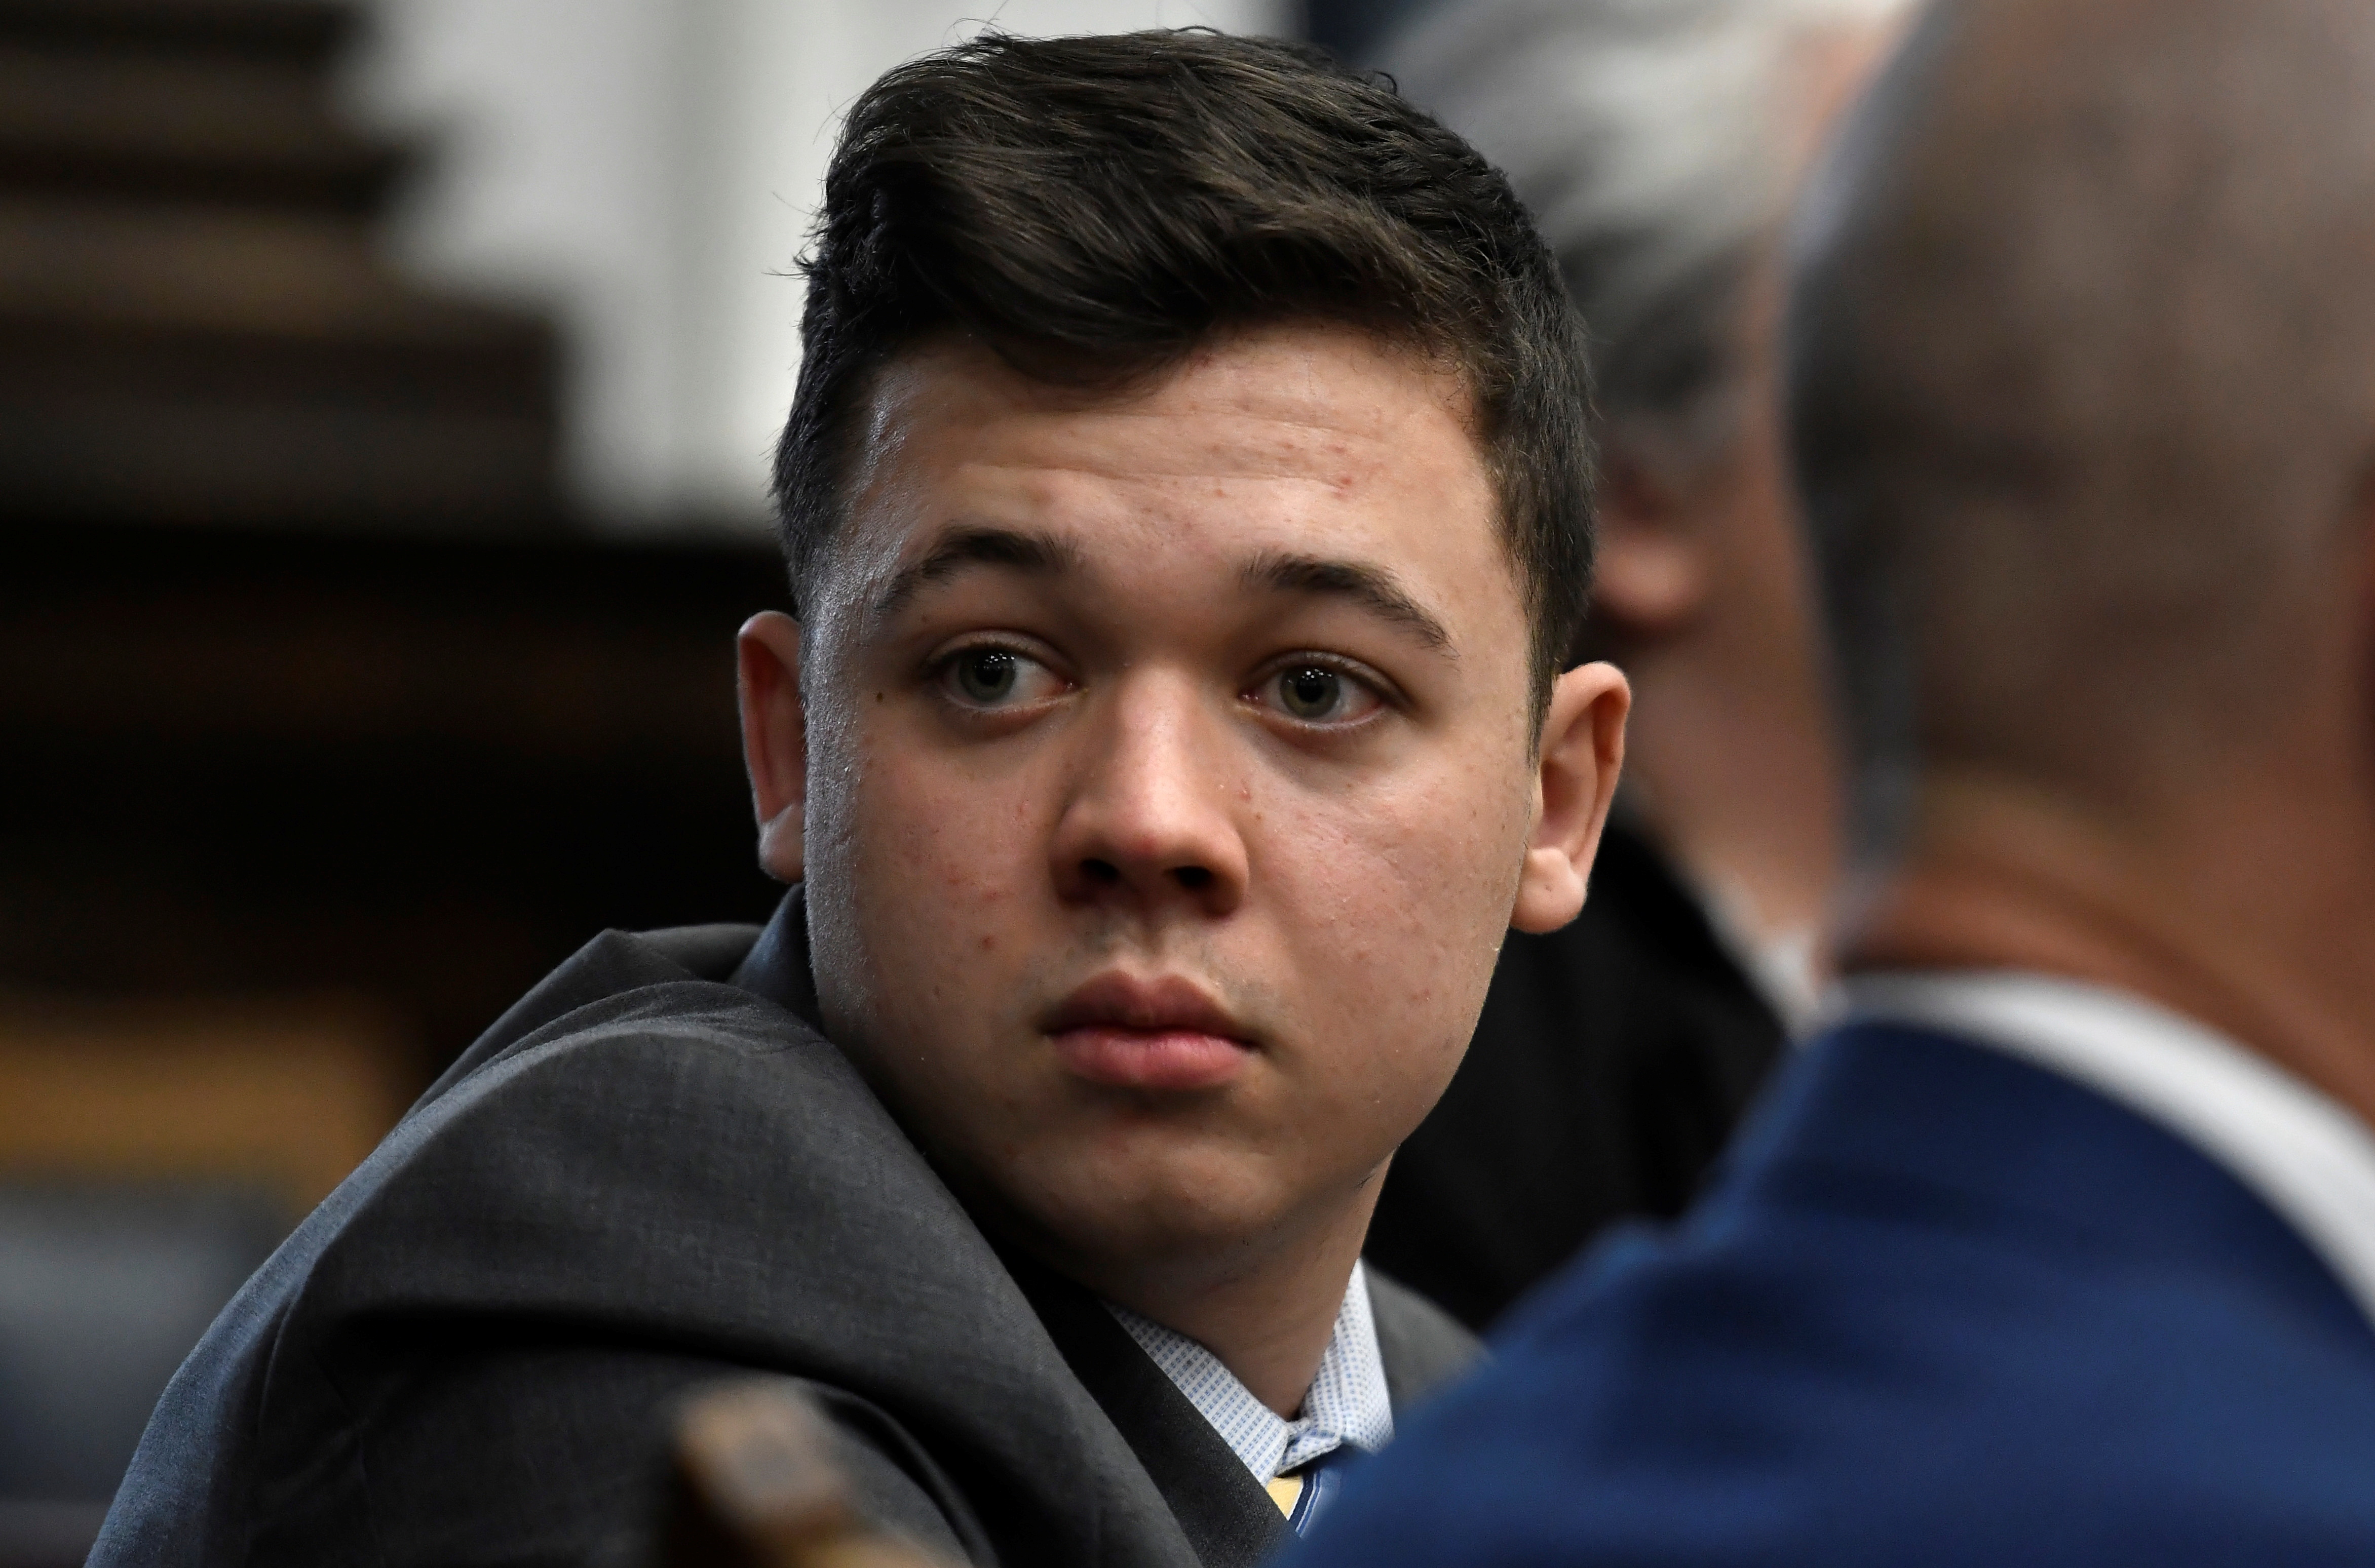 Kyle Rittenhouse looks back as attorneys discuss items in the motion for mistrial presented by his defense at the Kenosha County Courthouse in Kenosha, Wisconsin, U.S., November 17, 2021. Sean Krajacic/Pool via REUTERS